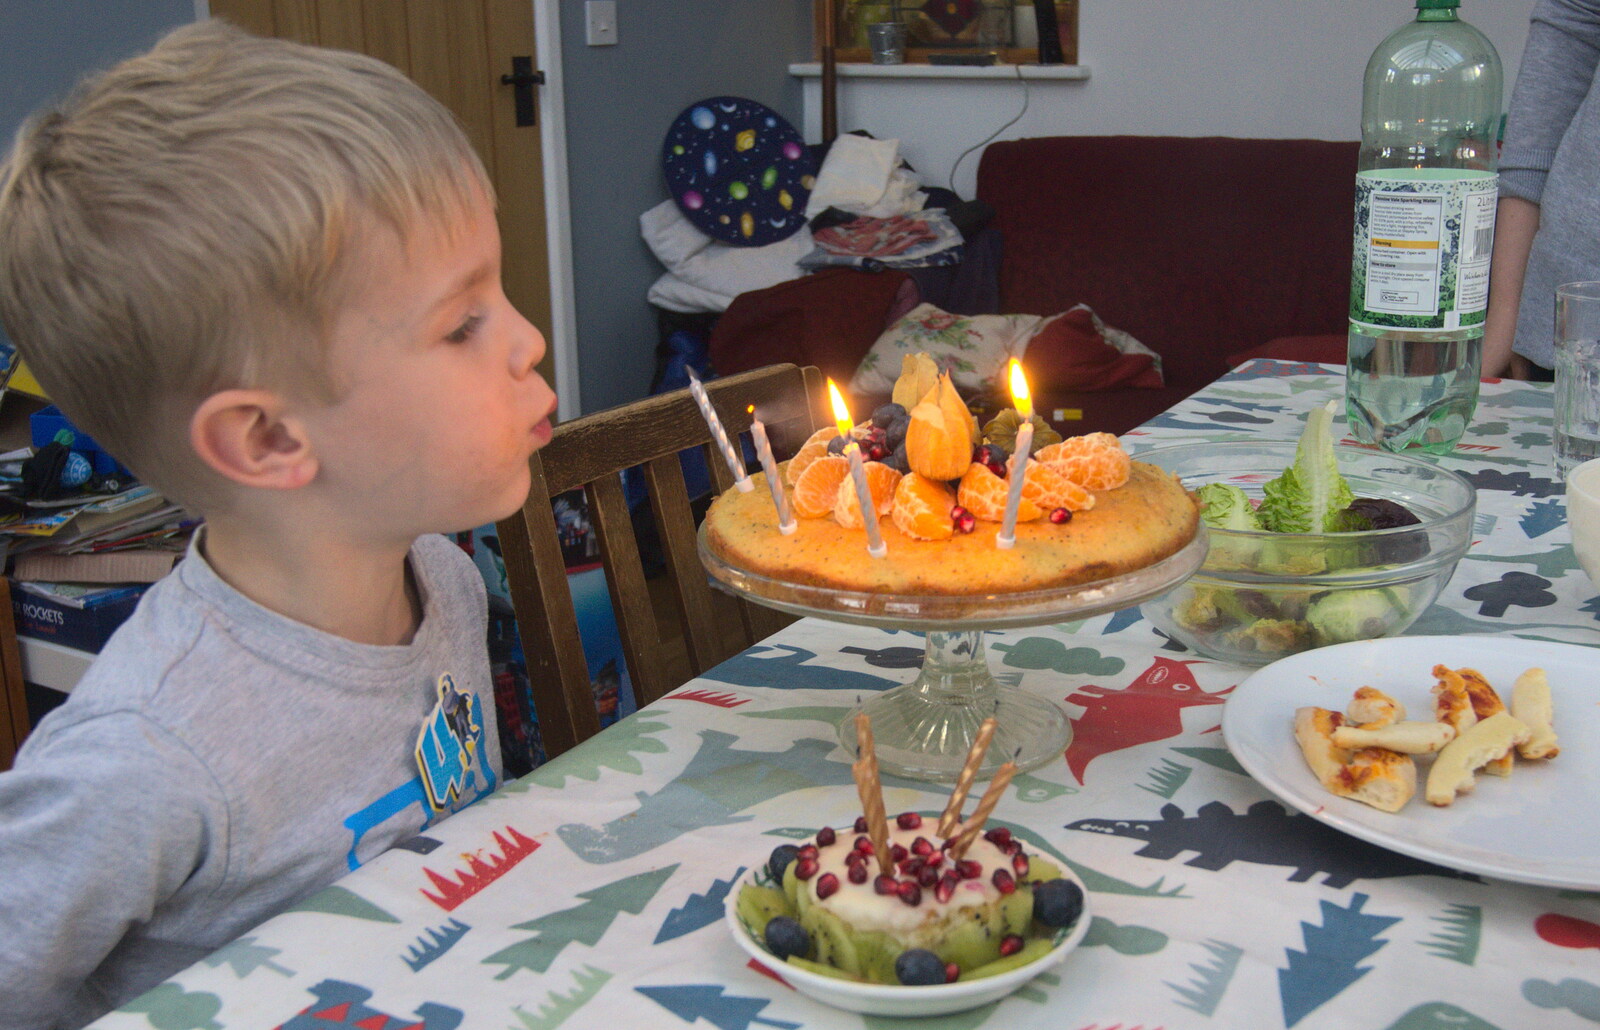 Harry blows out his candles from Harry's Birthday, Brome, Suffolk - 28th March 2016